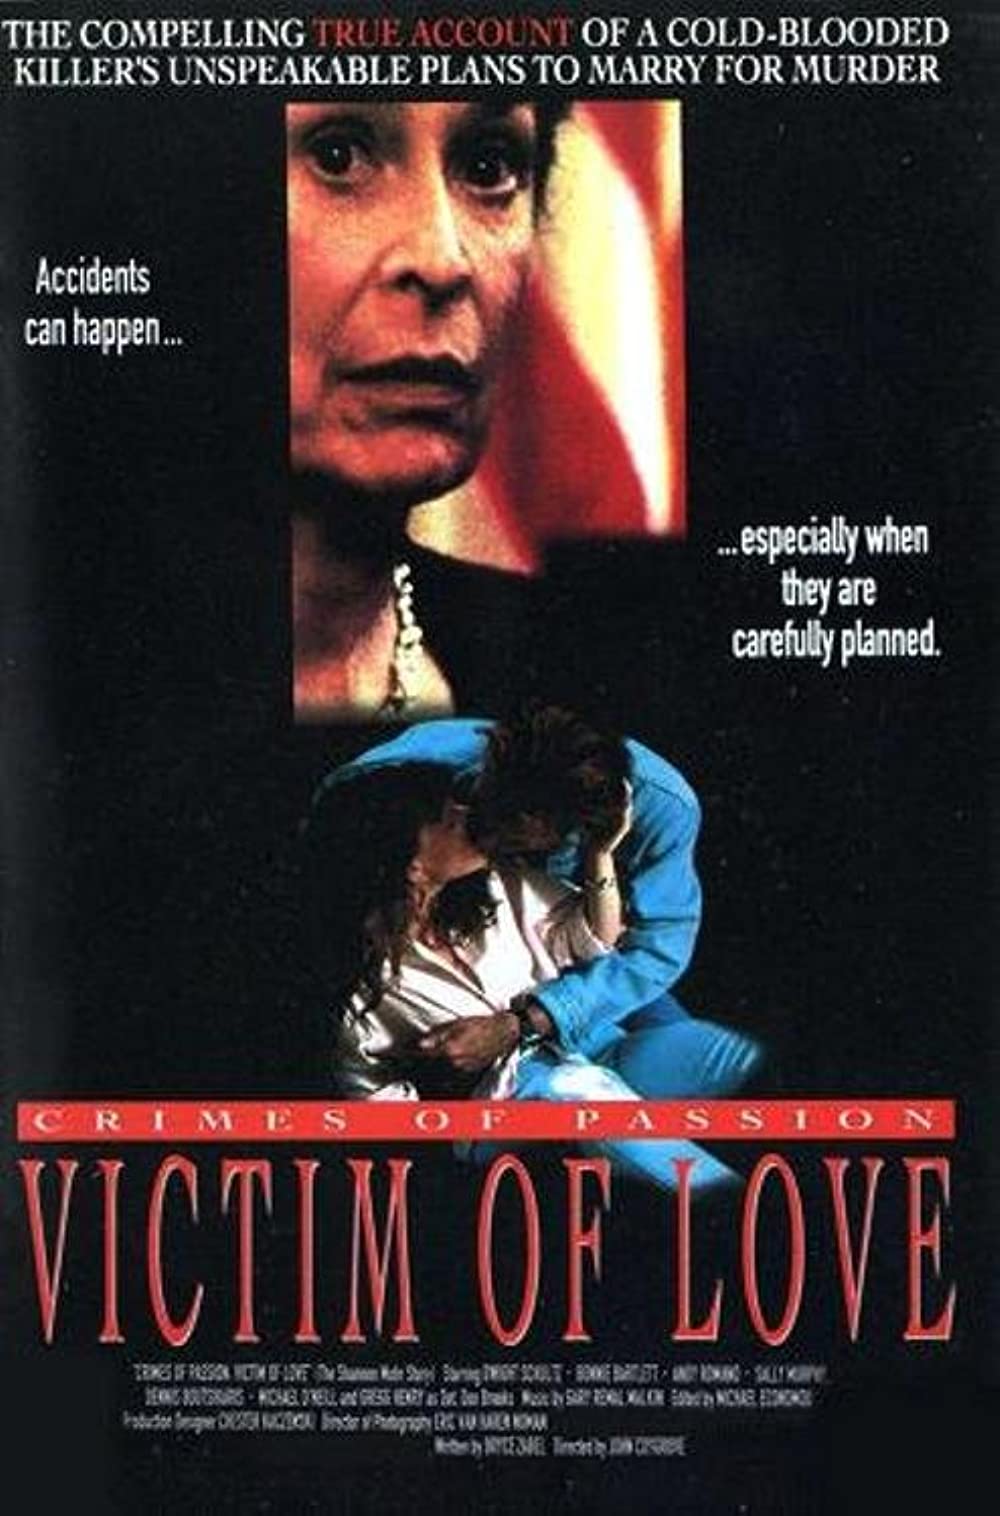 Victim of Love: The Shannon Mohr Story Dvd (1993)